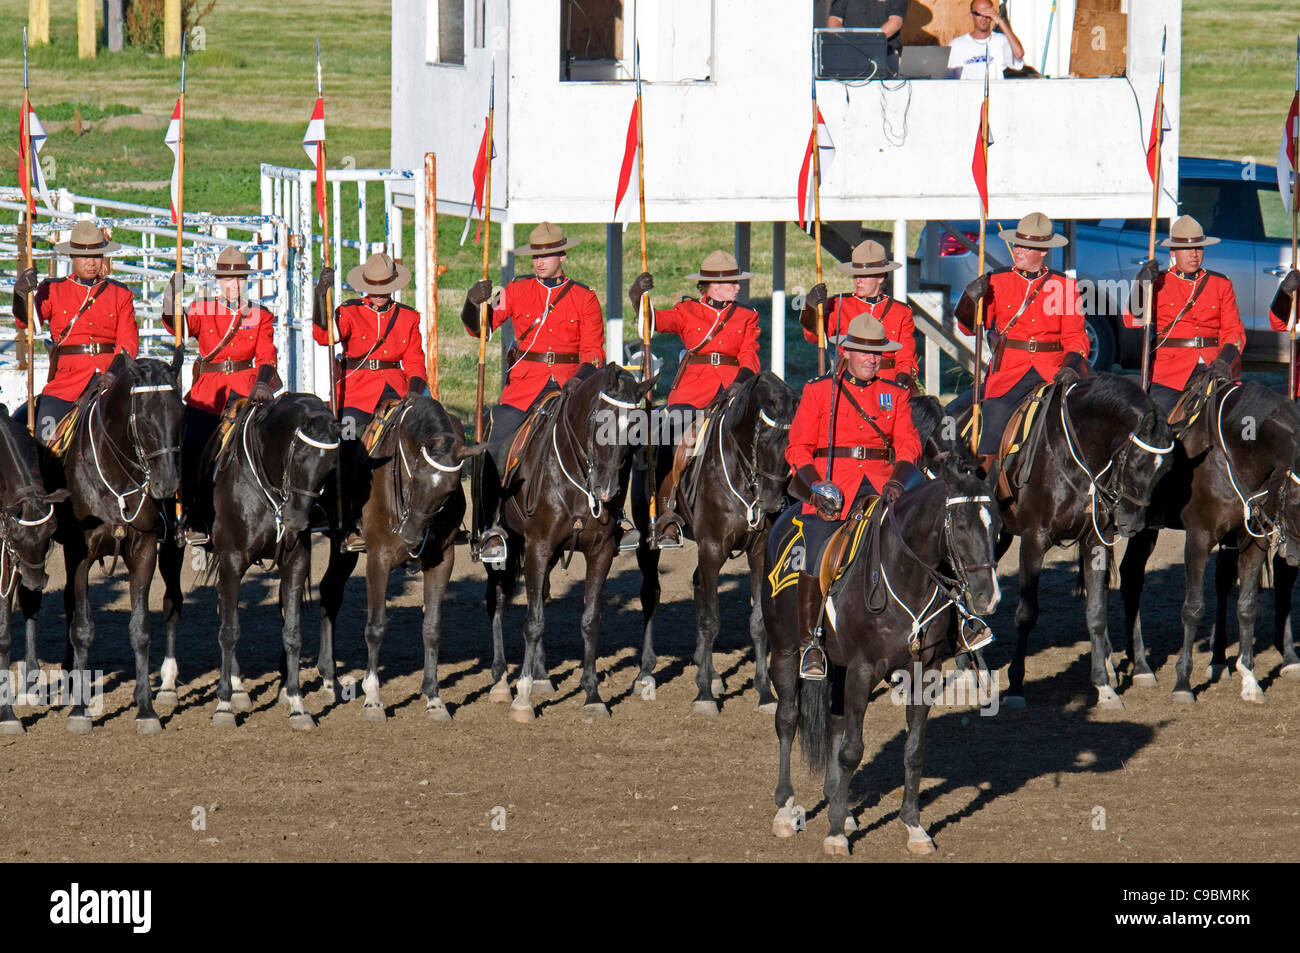 Canada, Alberta, Lethbridge, Royal Canadian Mounted Police Musical Ride, RCMP cavalry in full dress red serge uniform on horses Stock Photo